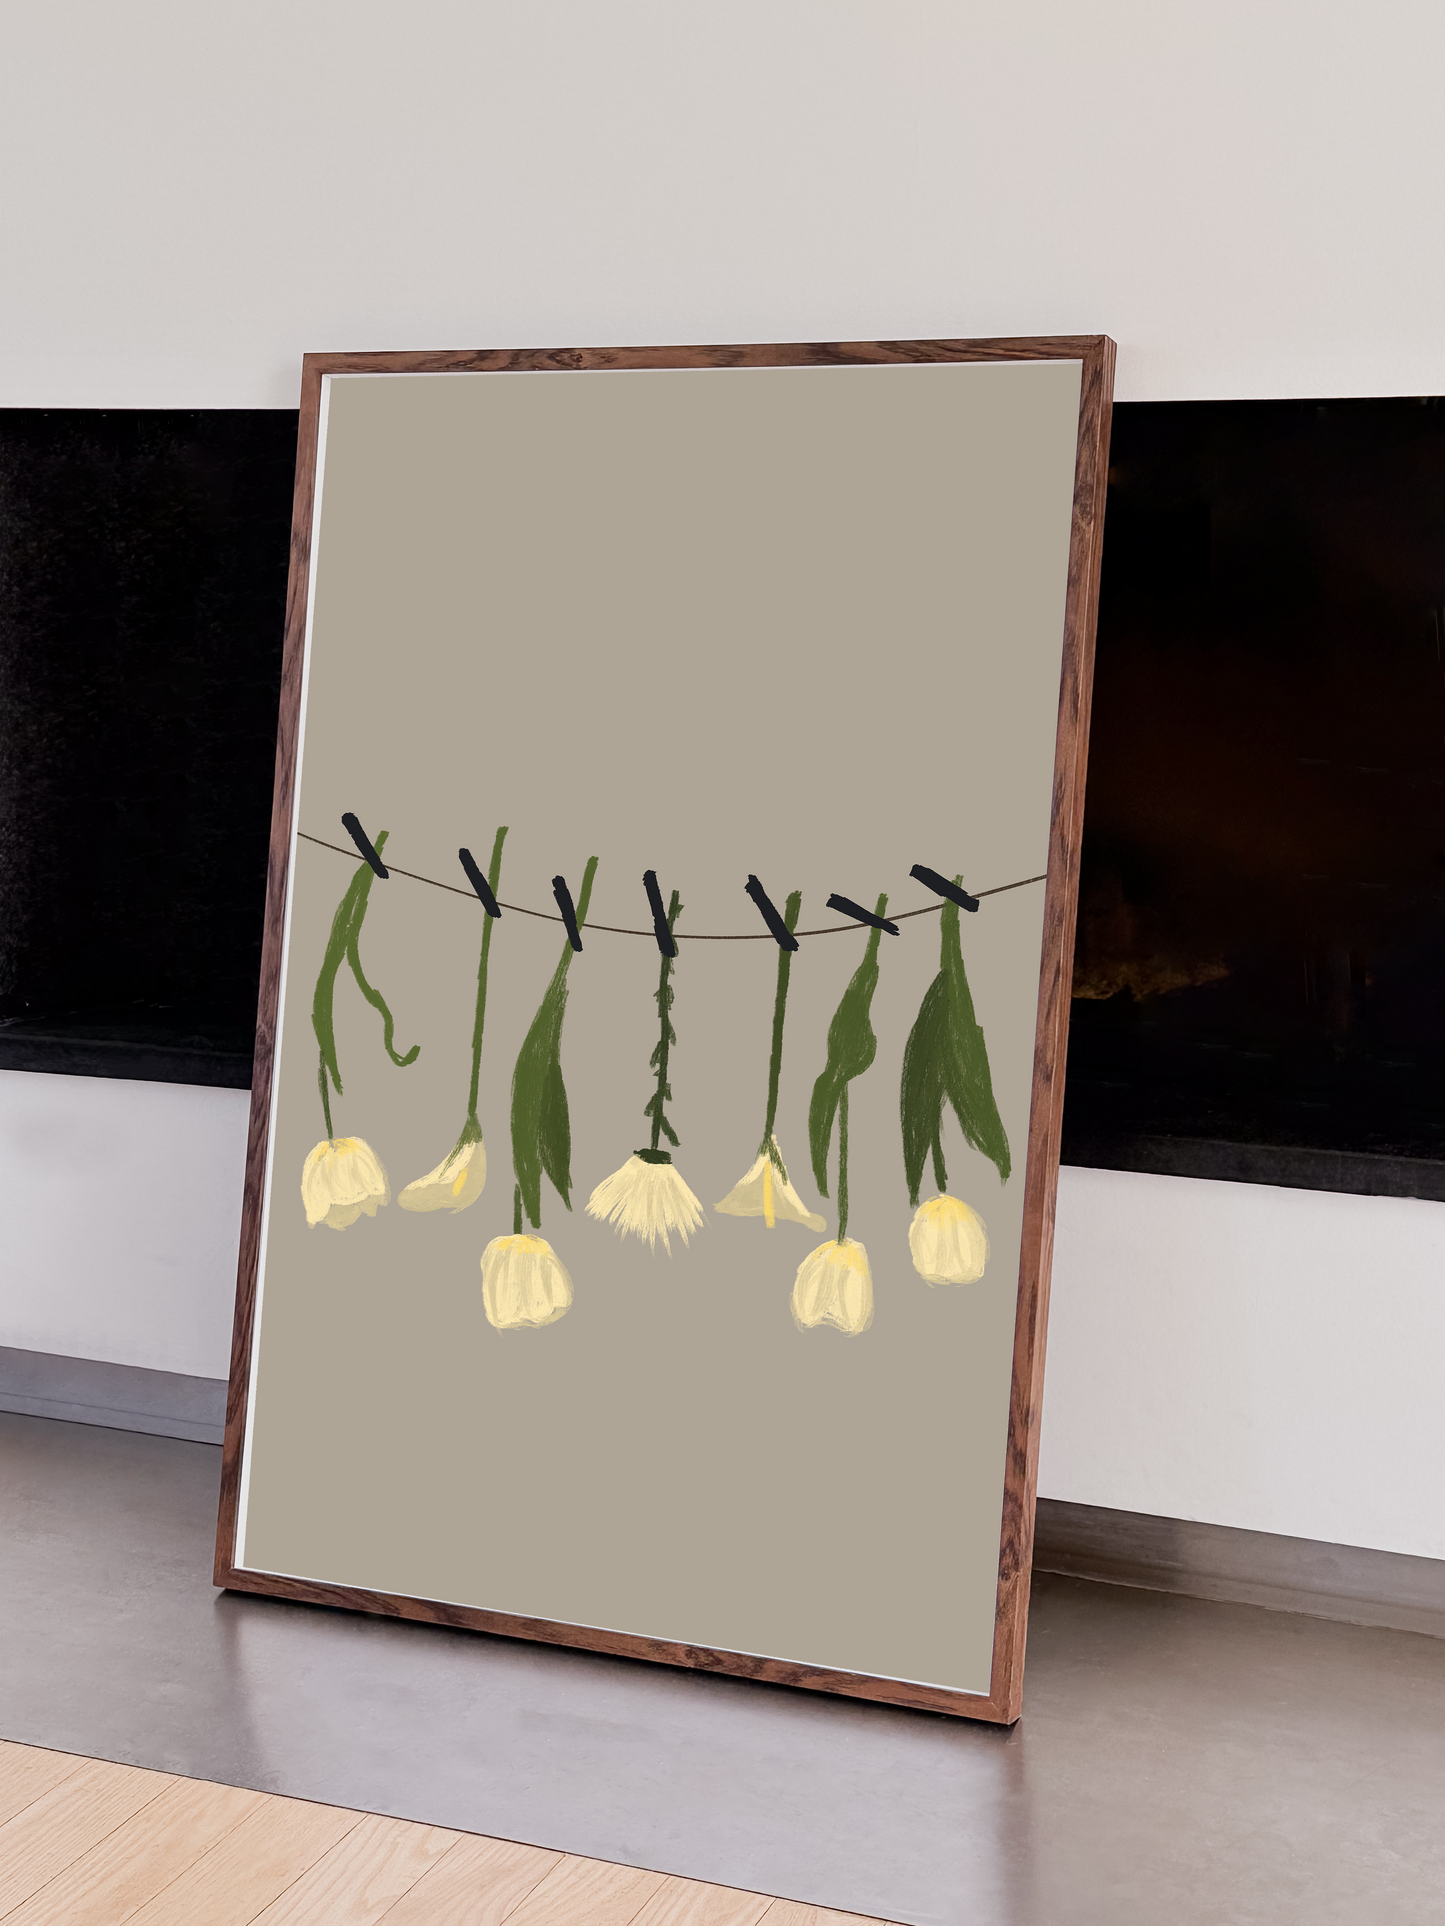 An elegant printable digital illustration of white flowers on a clothesline, in a dark wooden frame leaning against a wall near a modern fireplace.